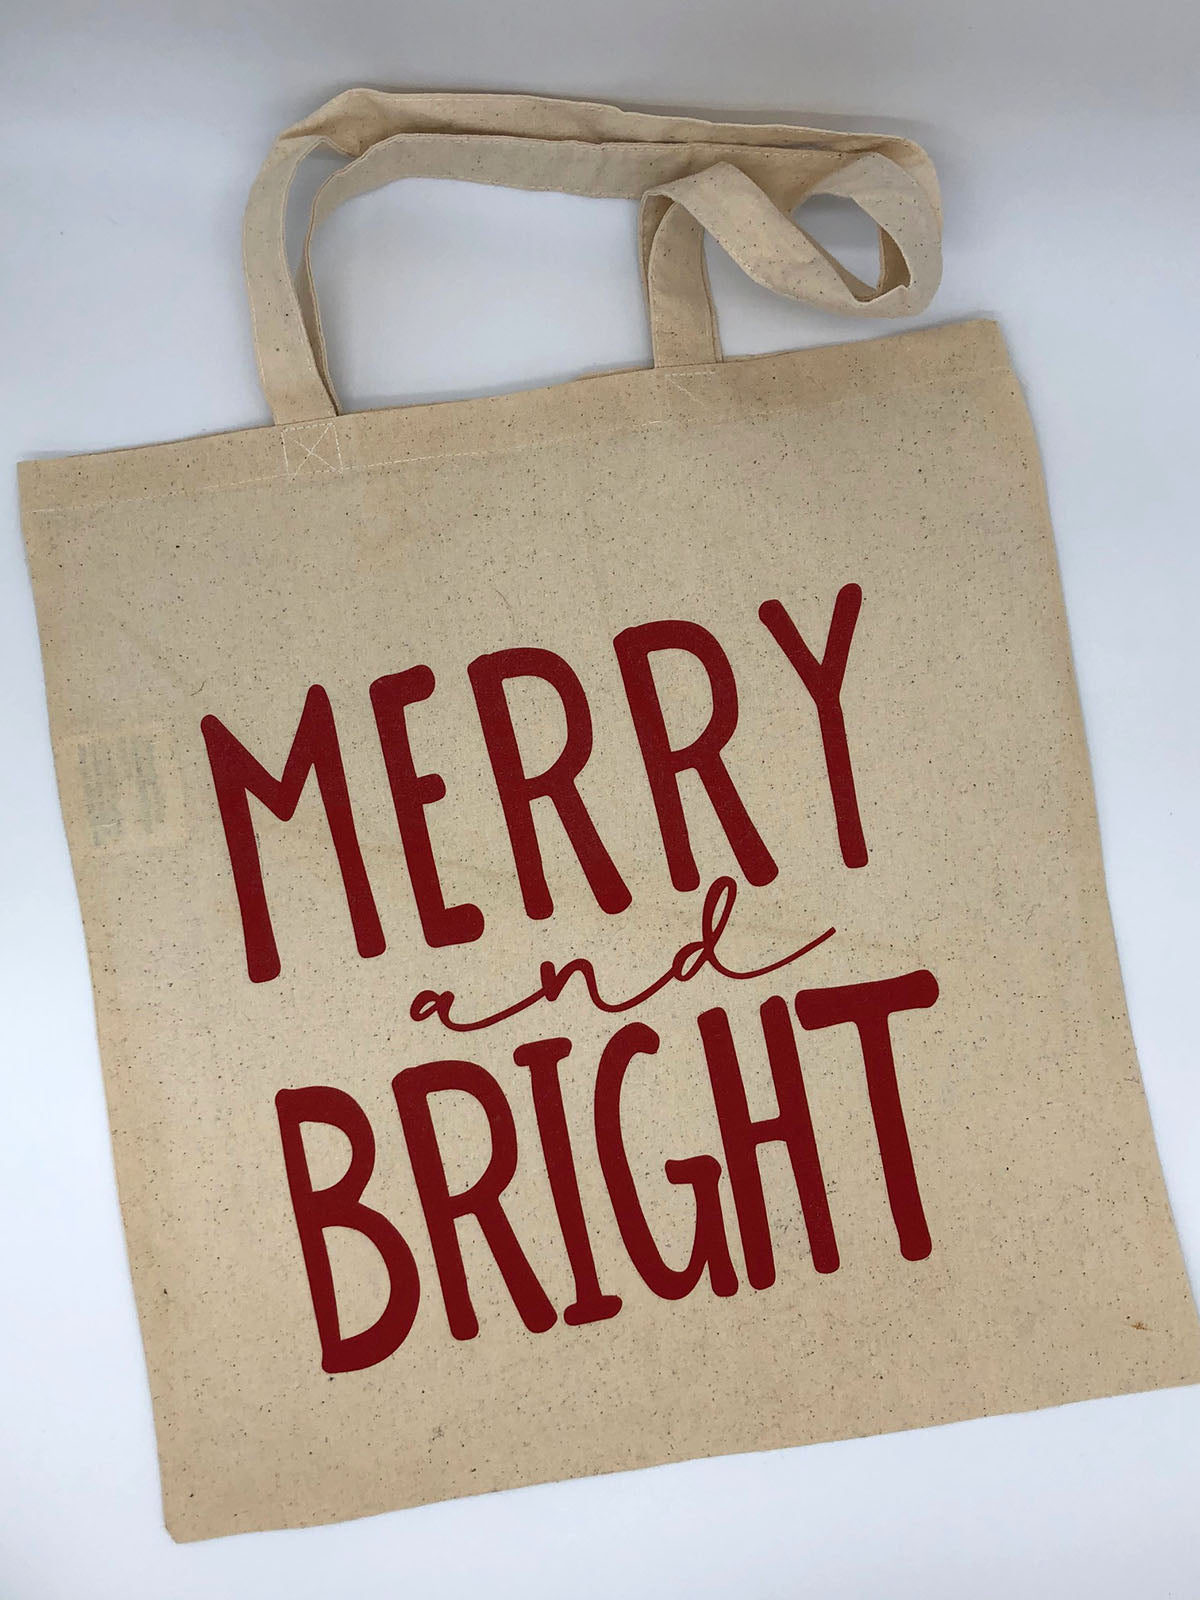 Merry and Bright Tote Bag